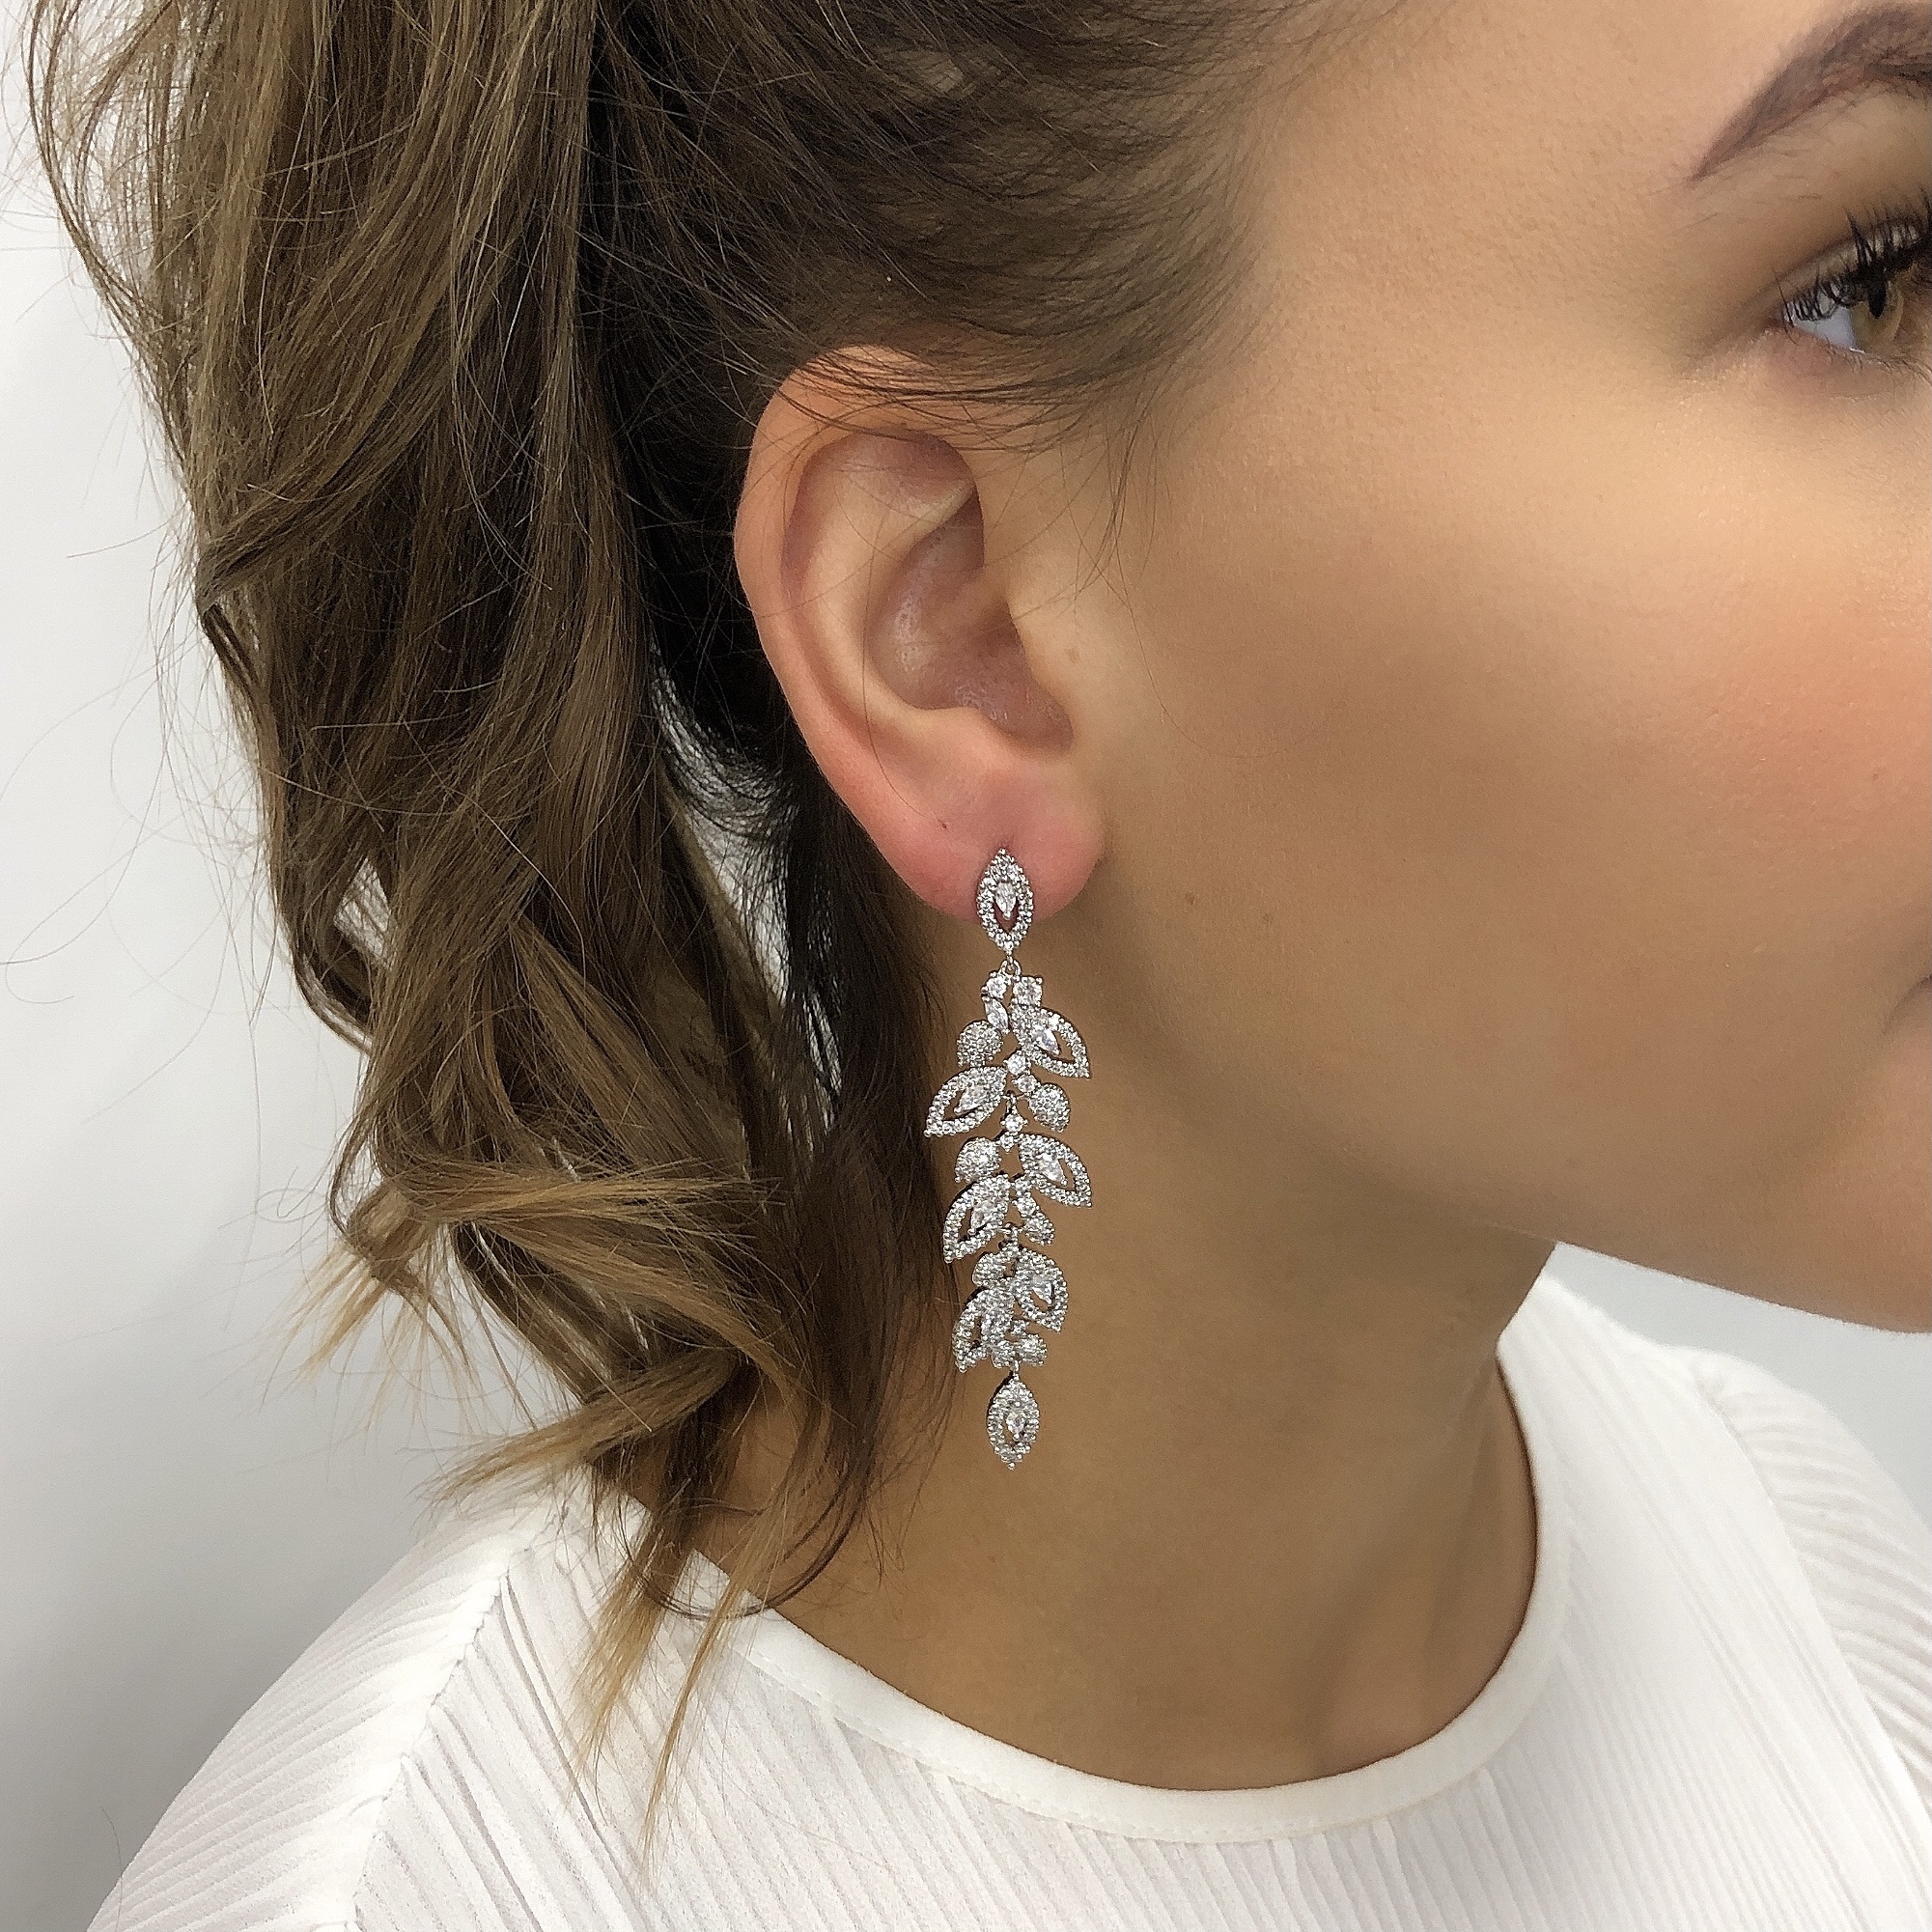 Made of the finest precision cut cubic zircons the quality of these bridal earrings is noticeable at first glance. nIntricately set crystals are joined together to create this stunning design. nFinished in allergy and nickel free rhodium plating to add to a worry free day.